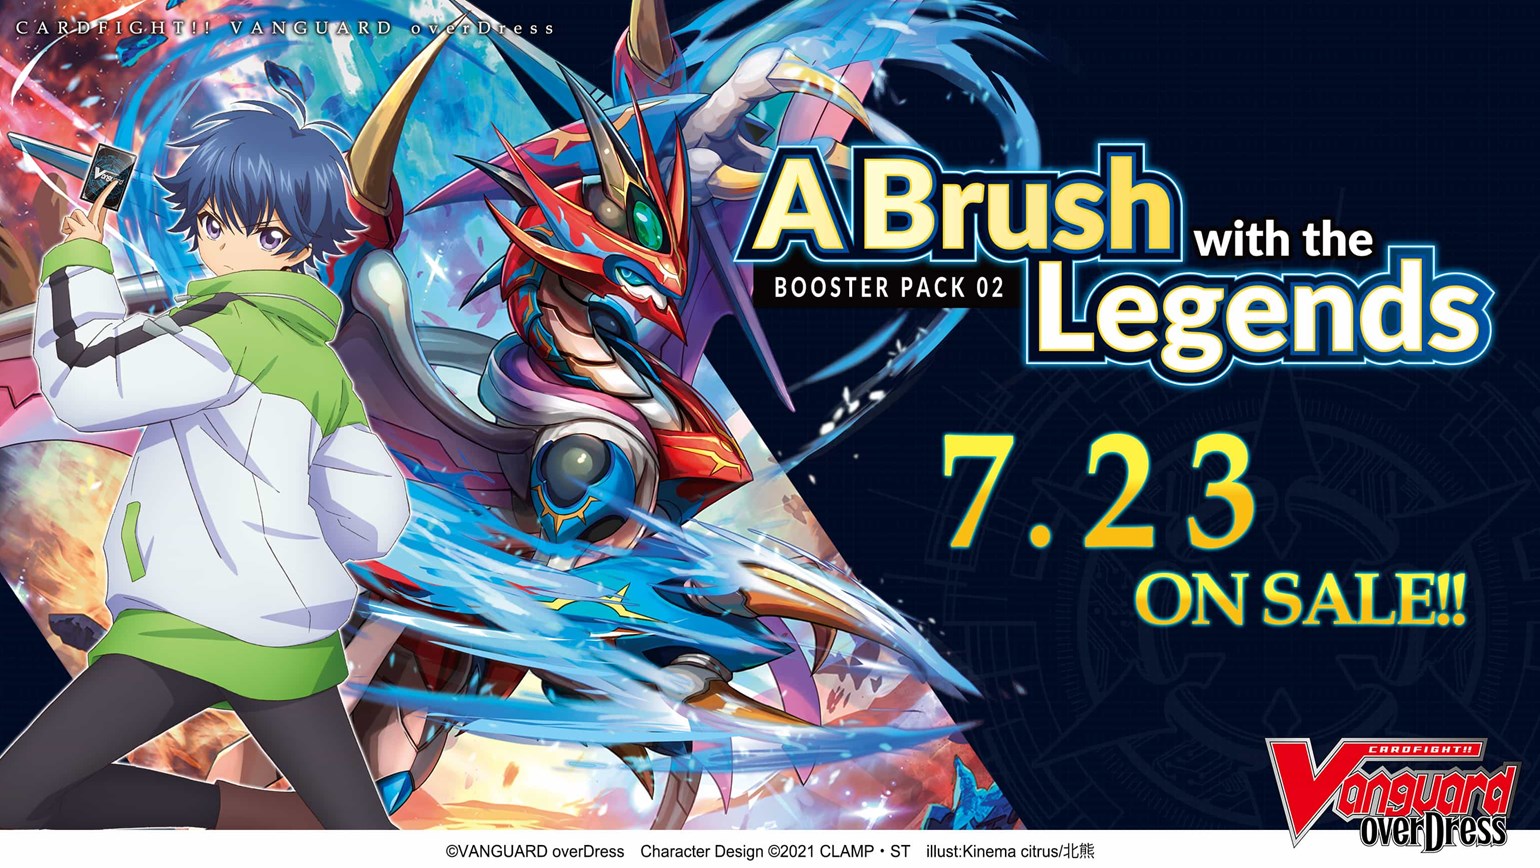 New English Edition overDress Booster Pack 02: A Brush with the Legends, Coming to Stores on July 23rd!